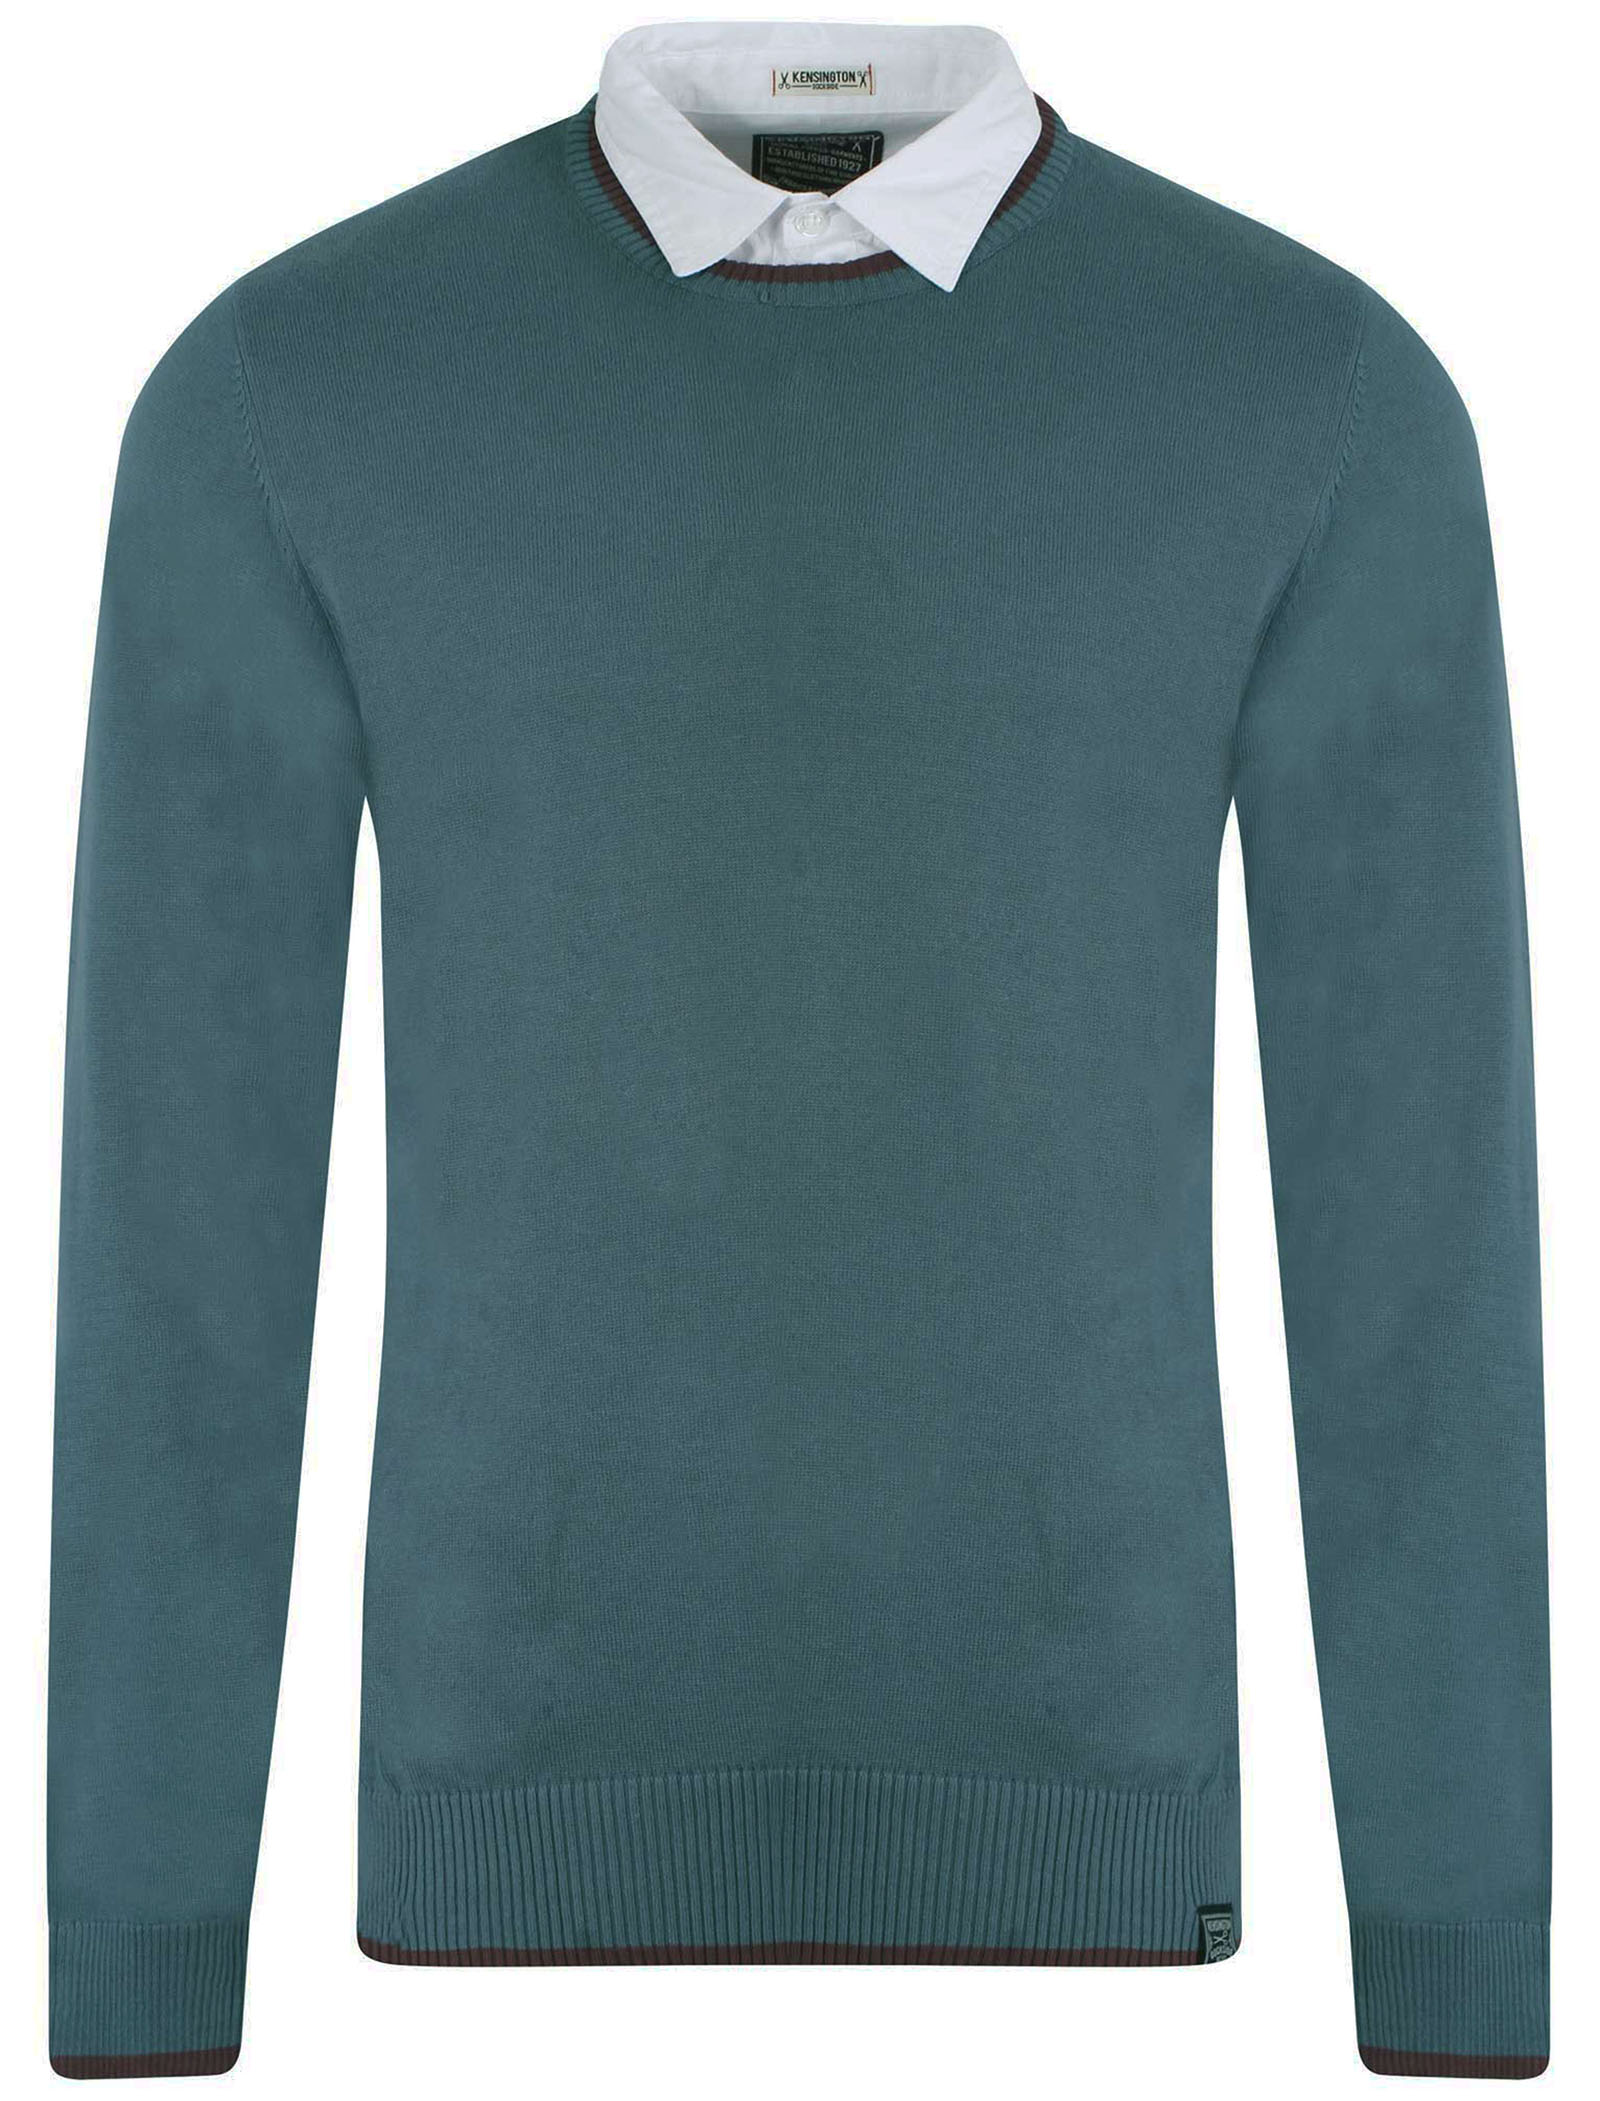 mens pullover sweater with collar